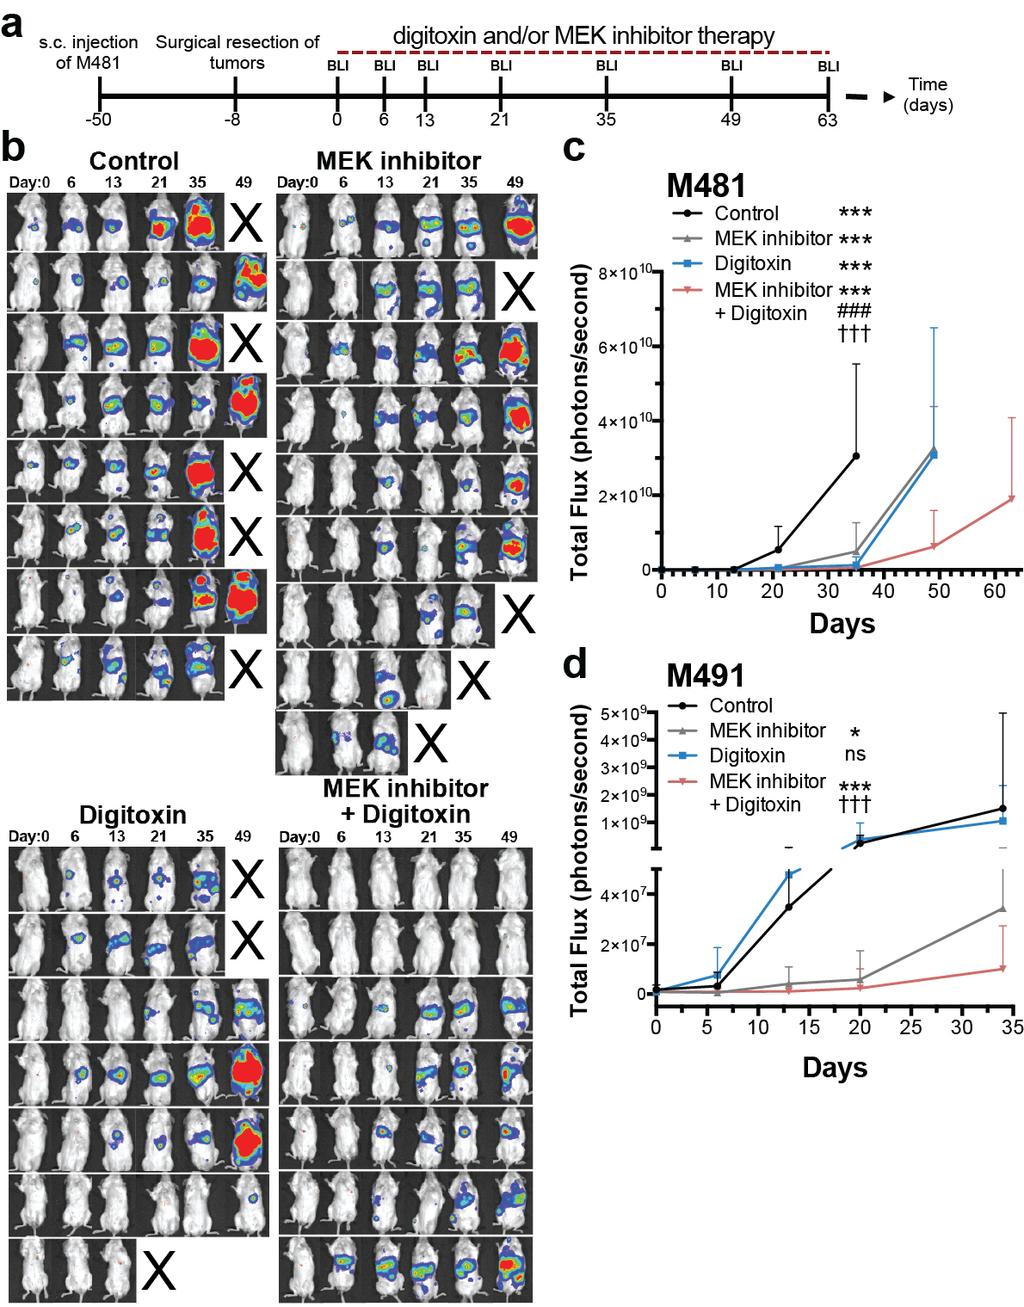 Supplementary Figure 4: Digitoxin plus MEK inhibitor additively or synergistically inhibits the growth of patient-derived xenografts and extends the survival of mice with metastatic human melanomas.